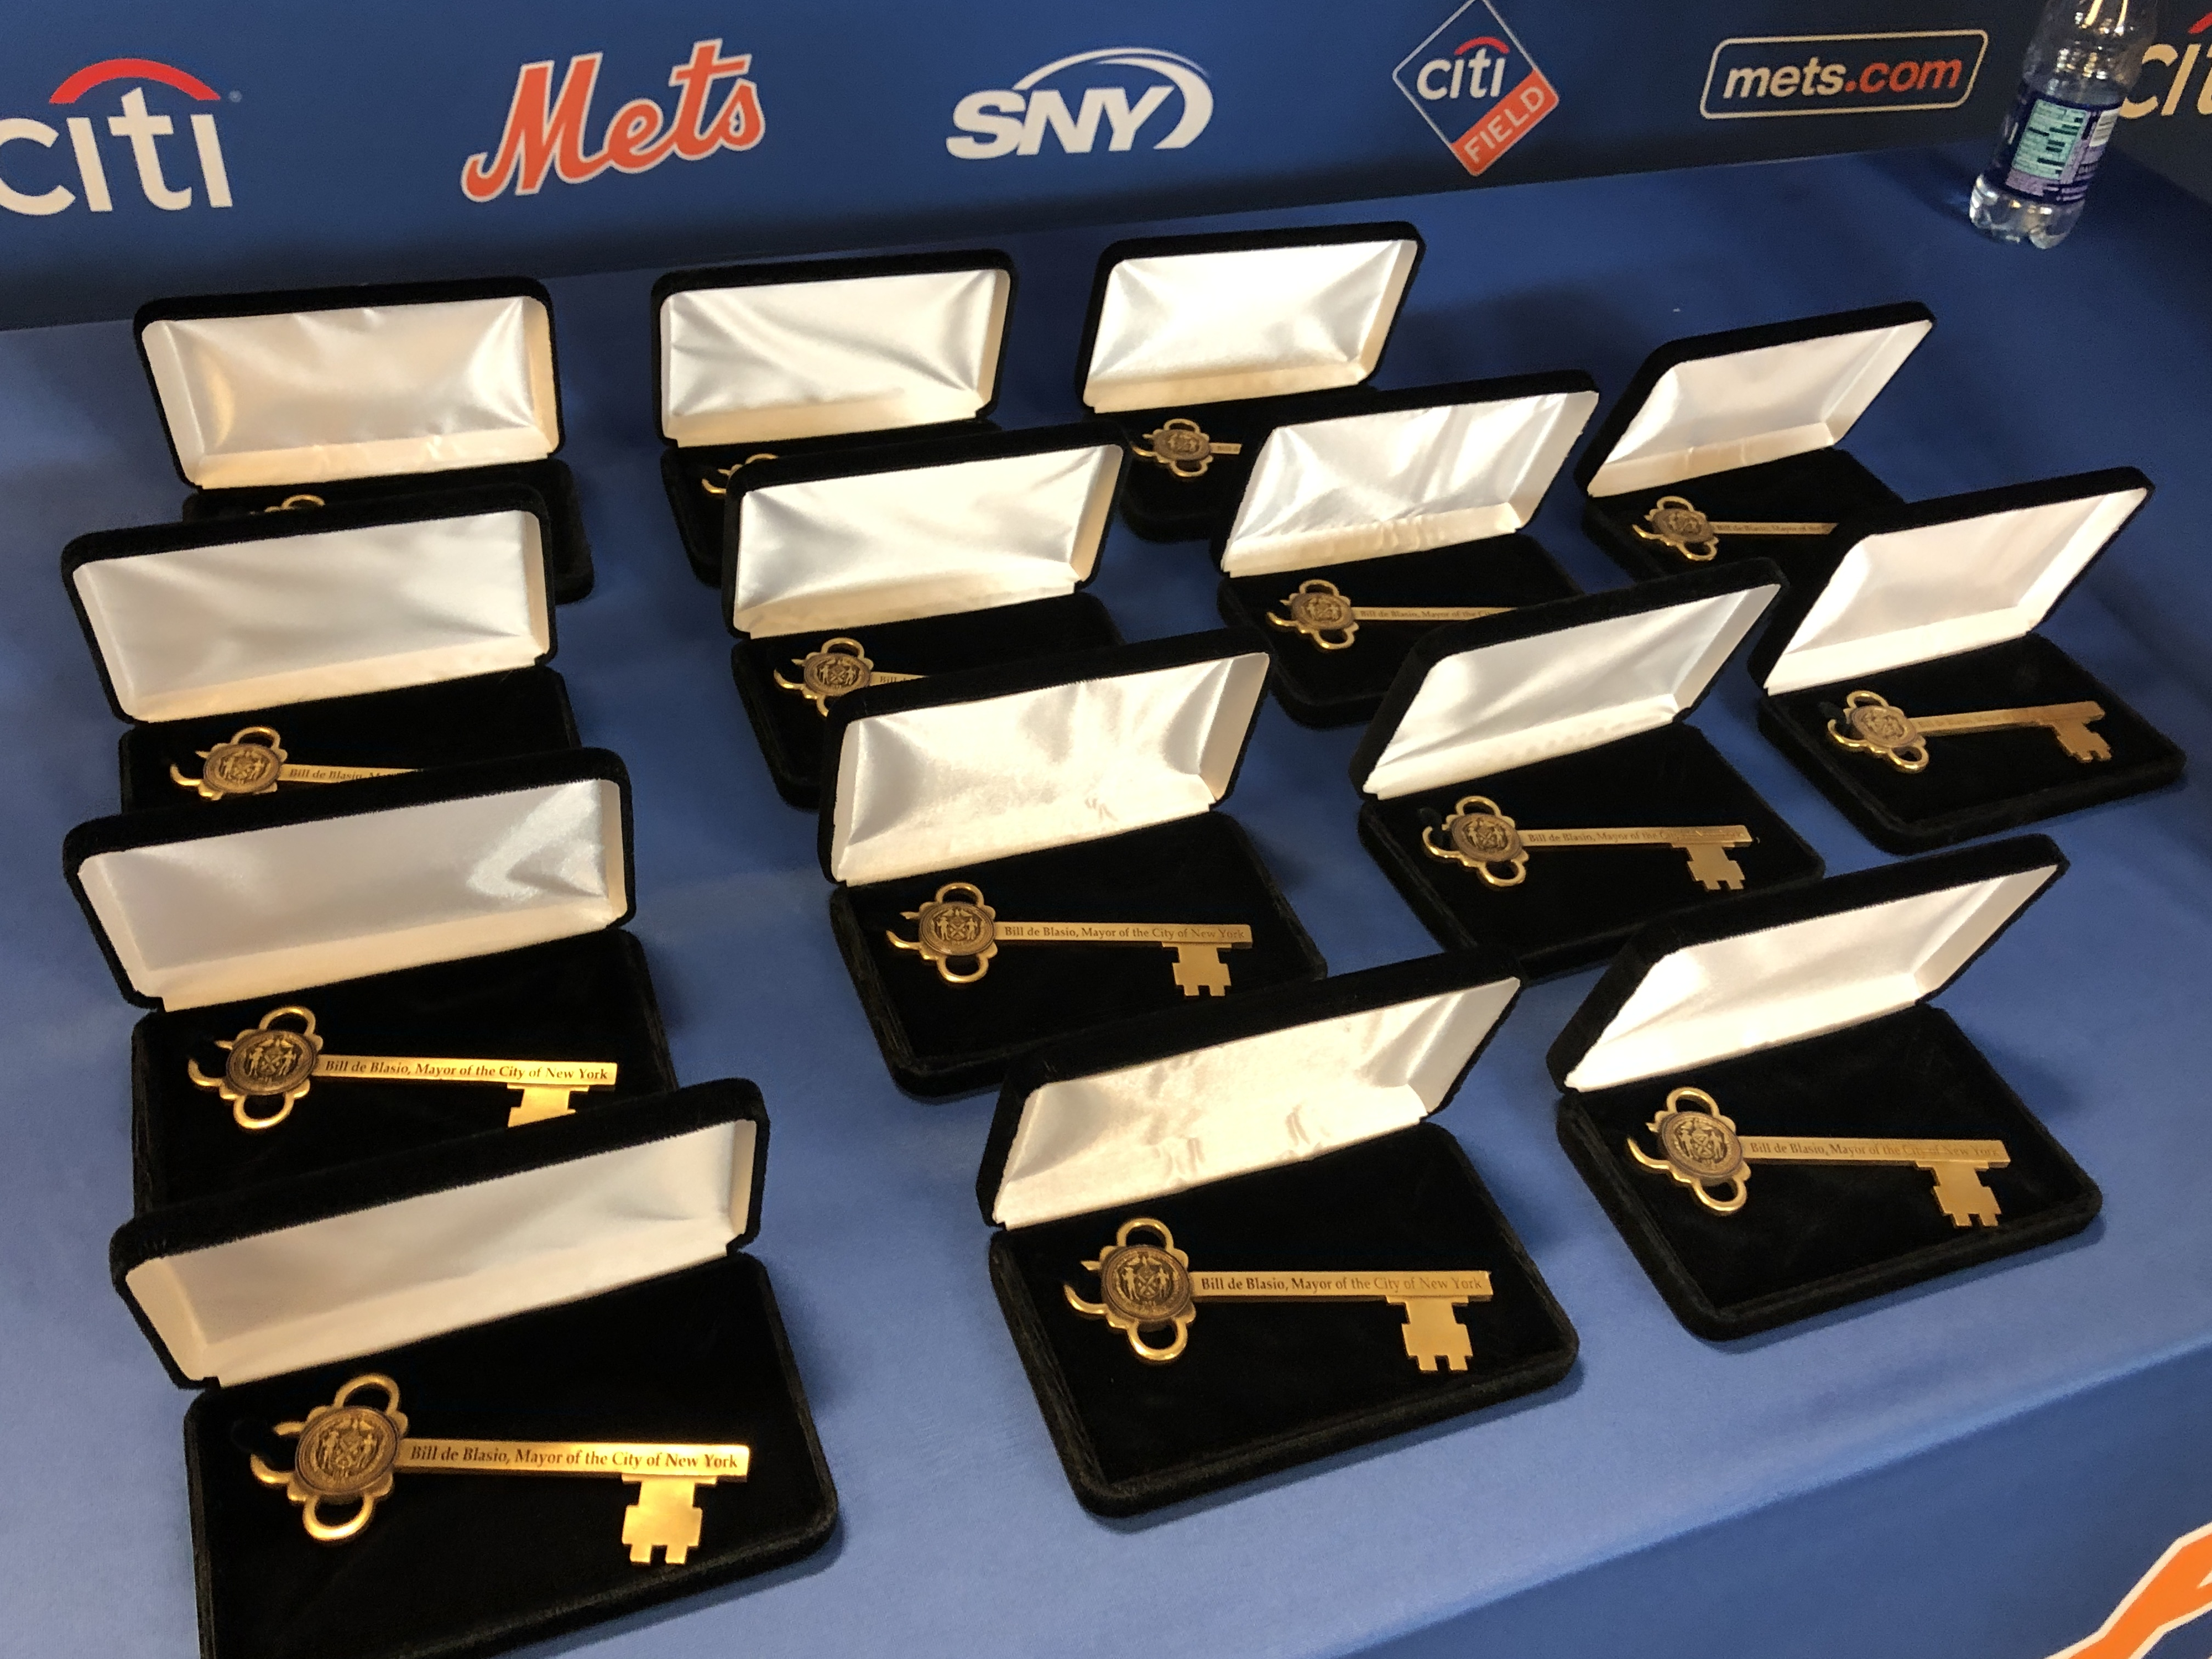 1969 Mets honored with parade, keys to NYC